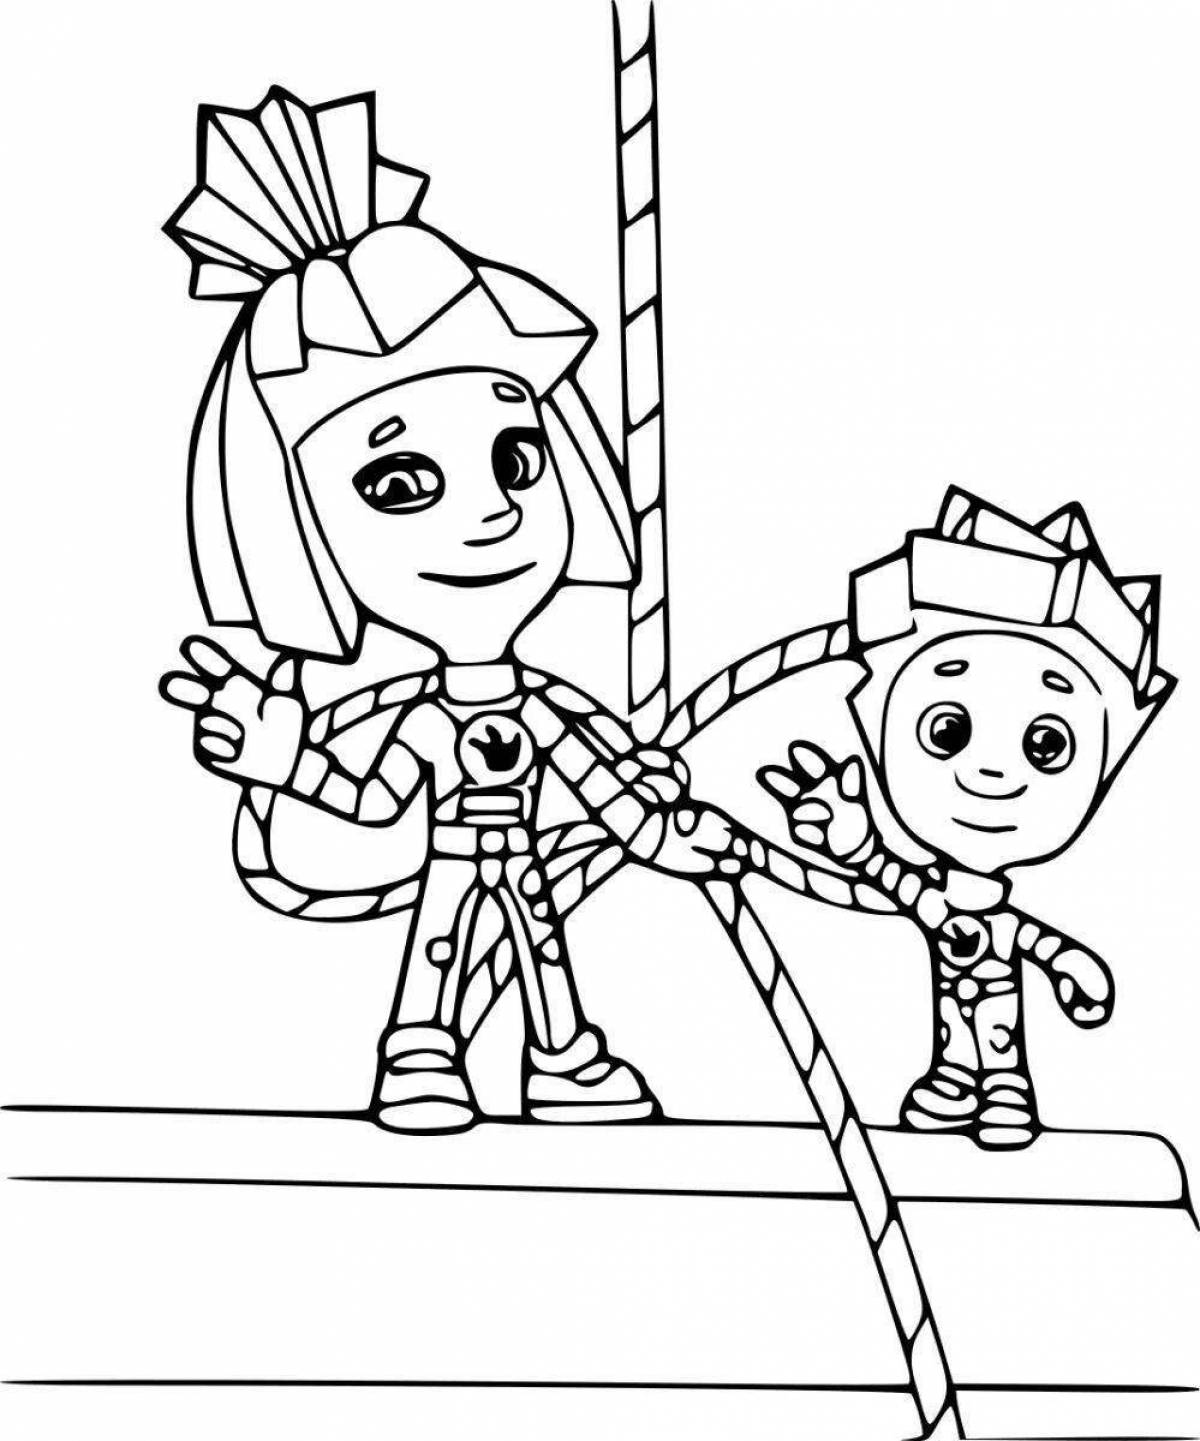 Attractive fixies coloring pages for kids